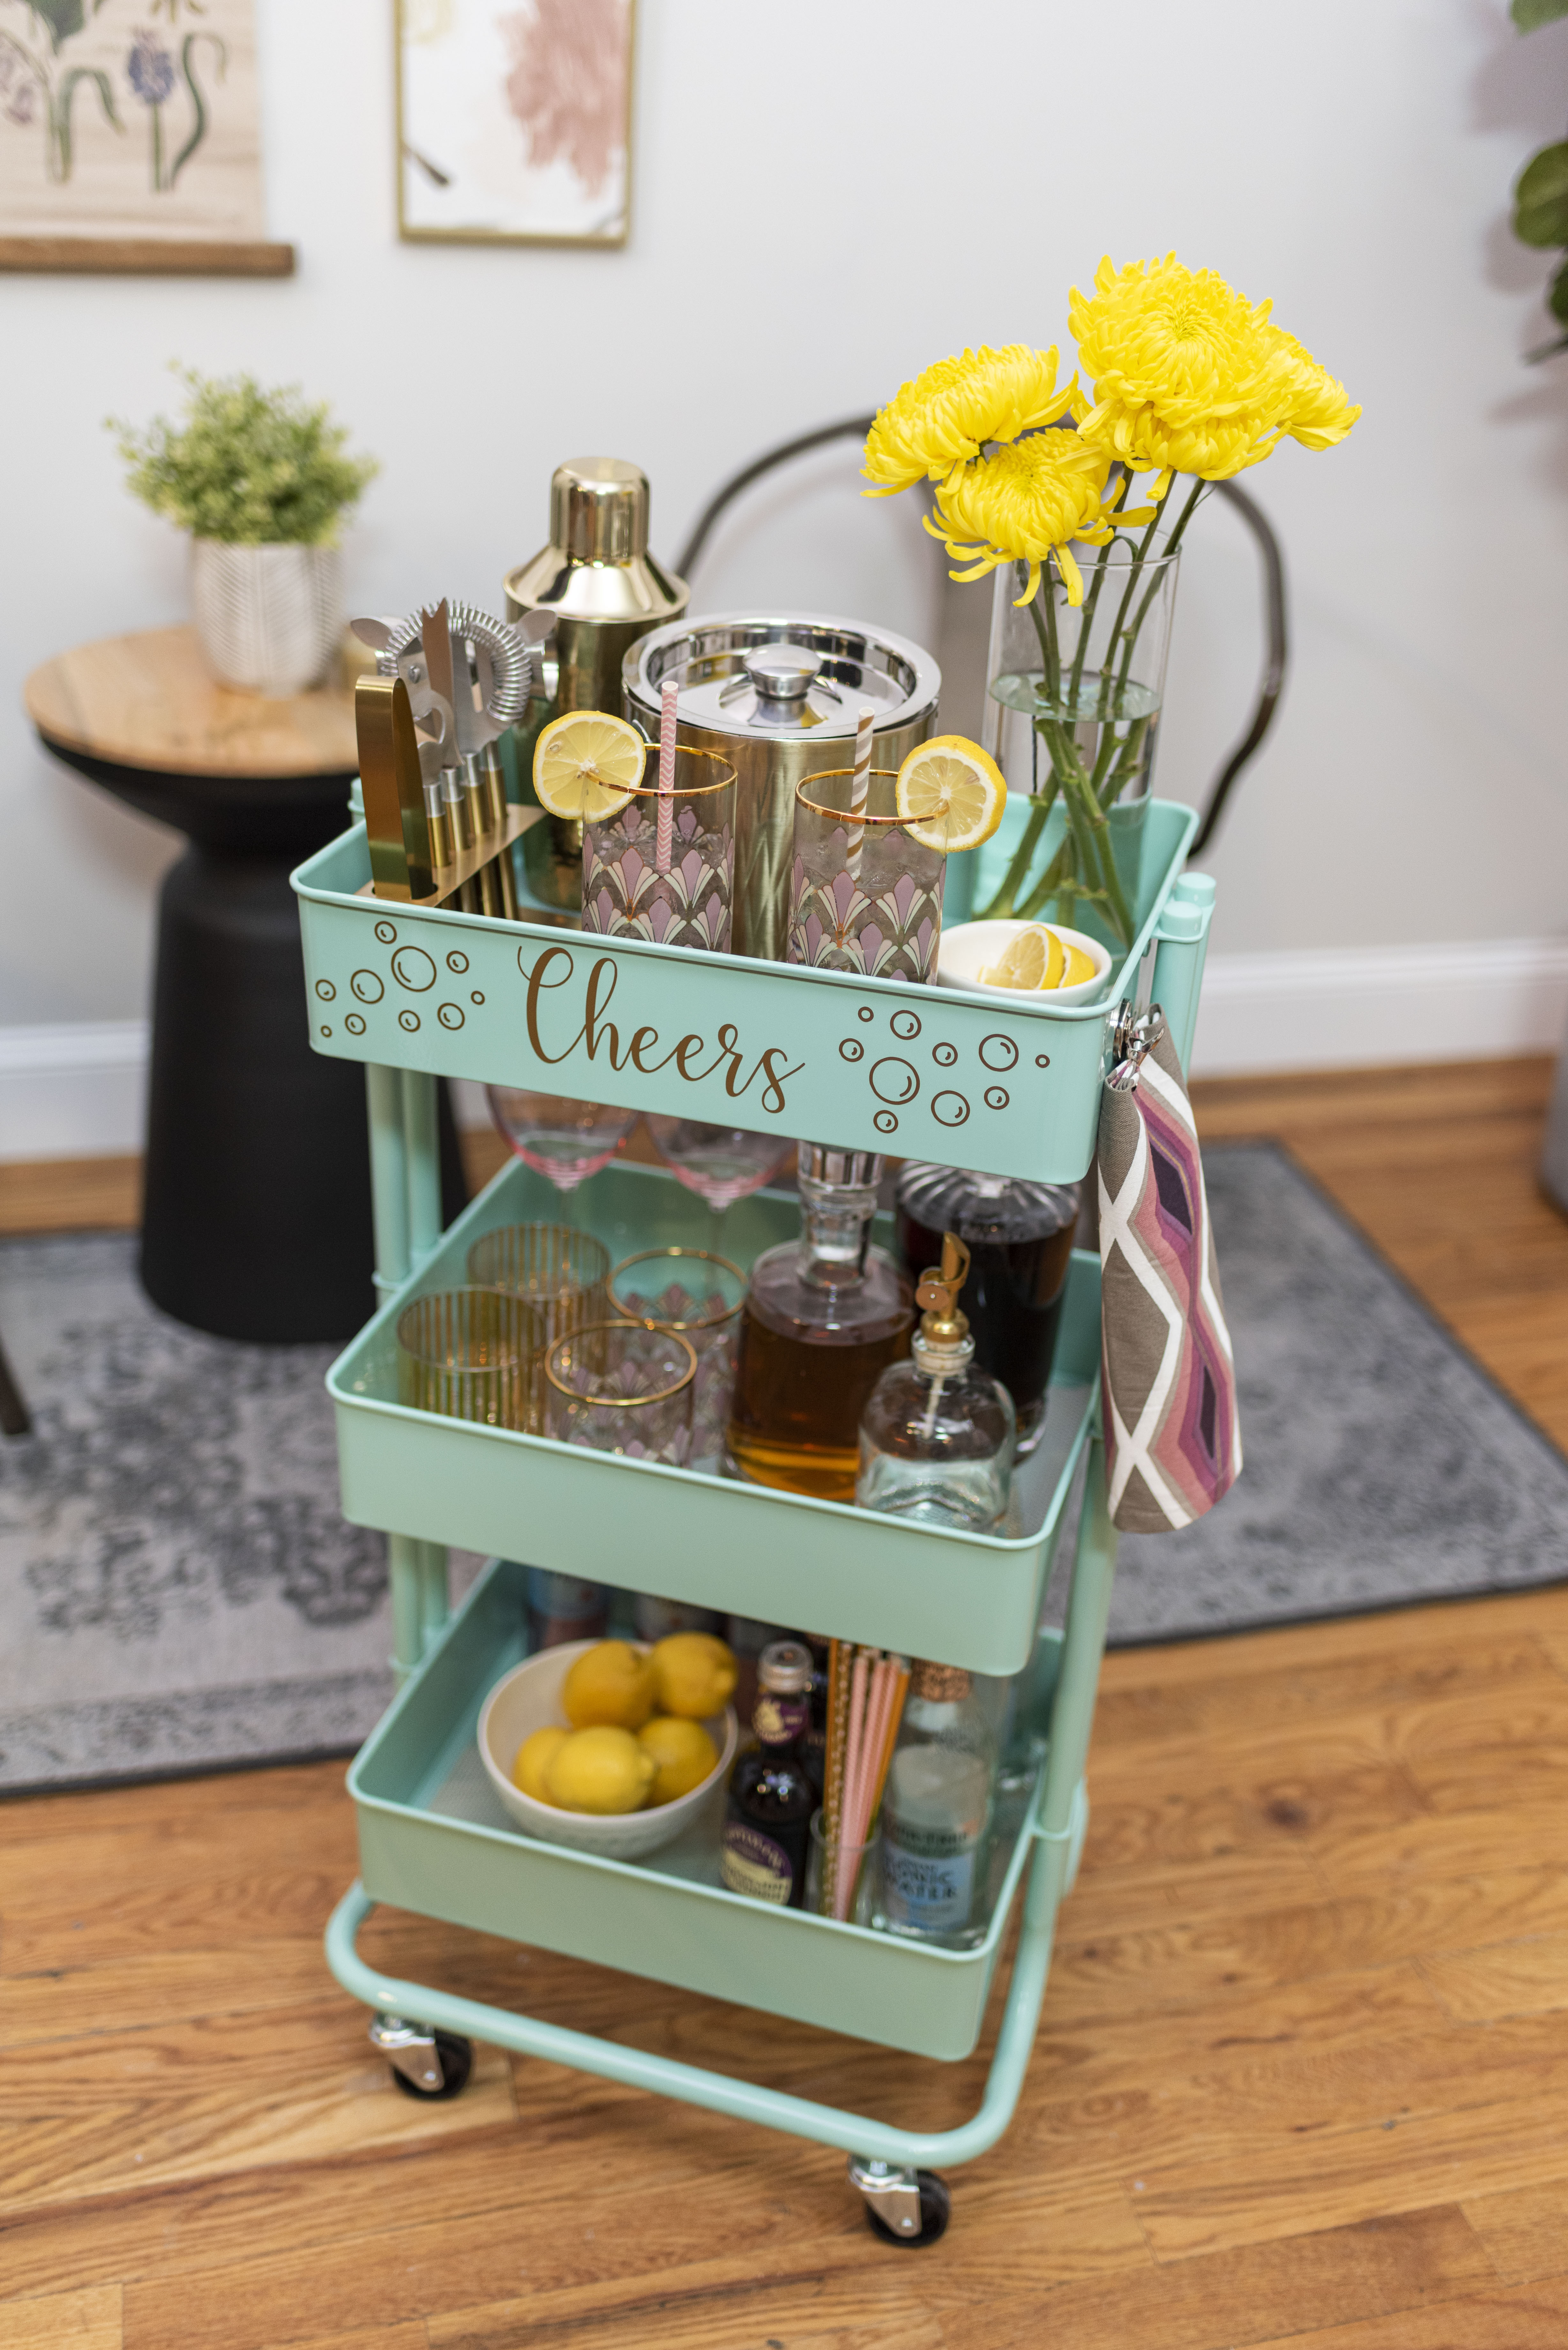 Details about   Rolling Cart With Wheel Rolling Cart Bathroom Bedroom Kitchen Organizer 3 Tiers 